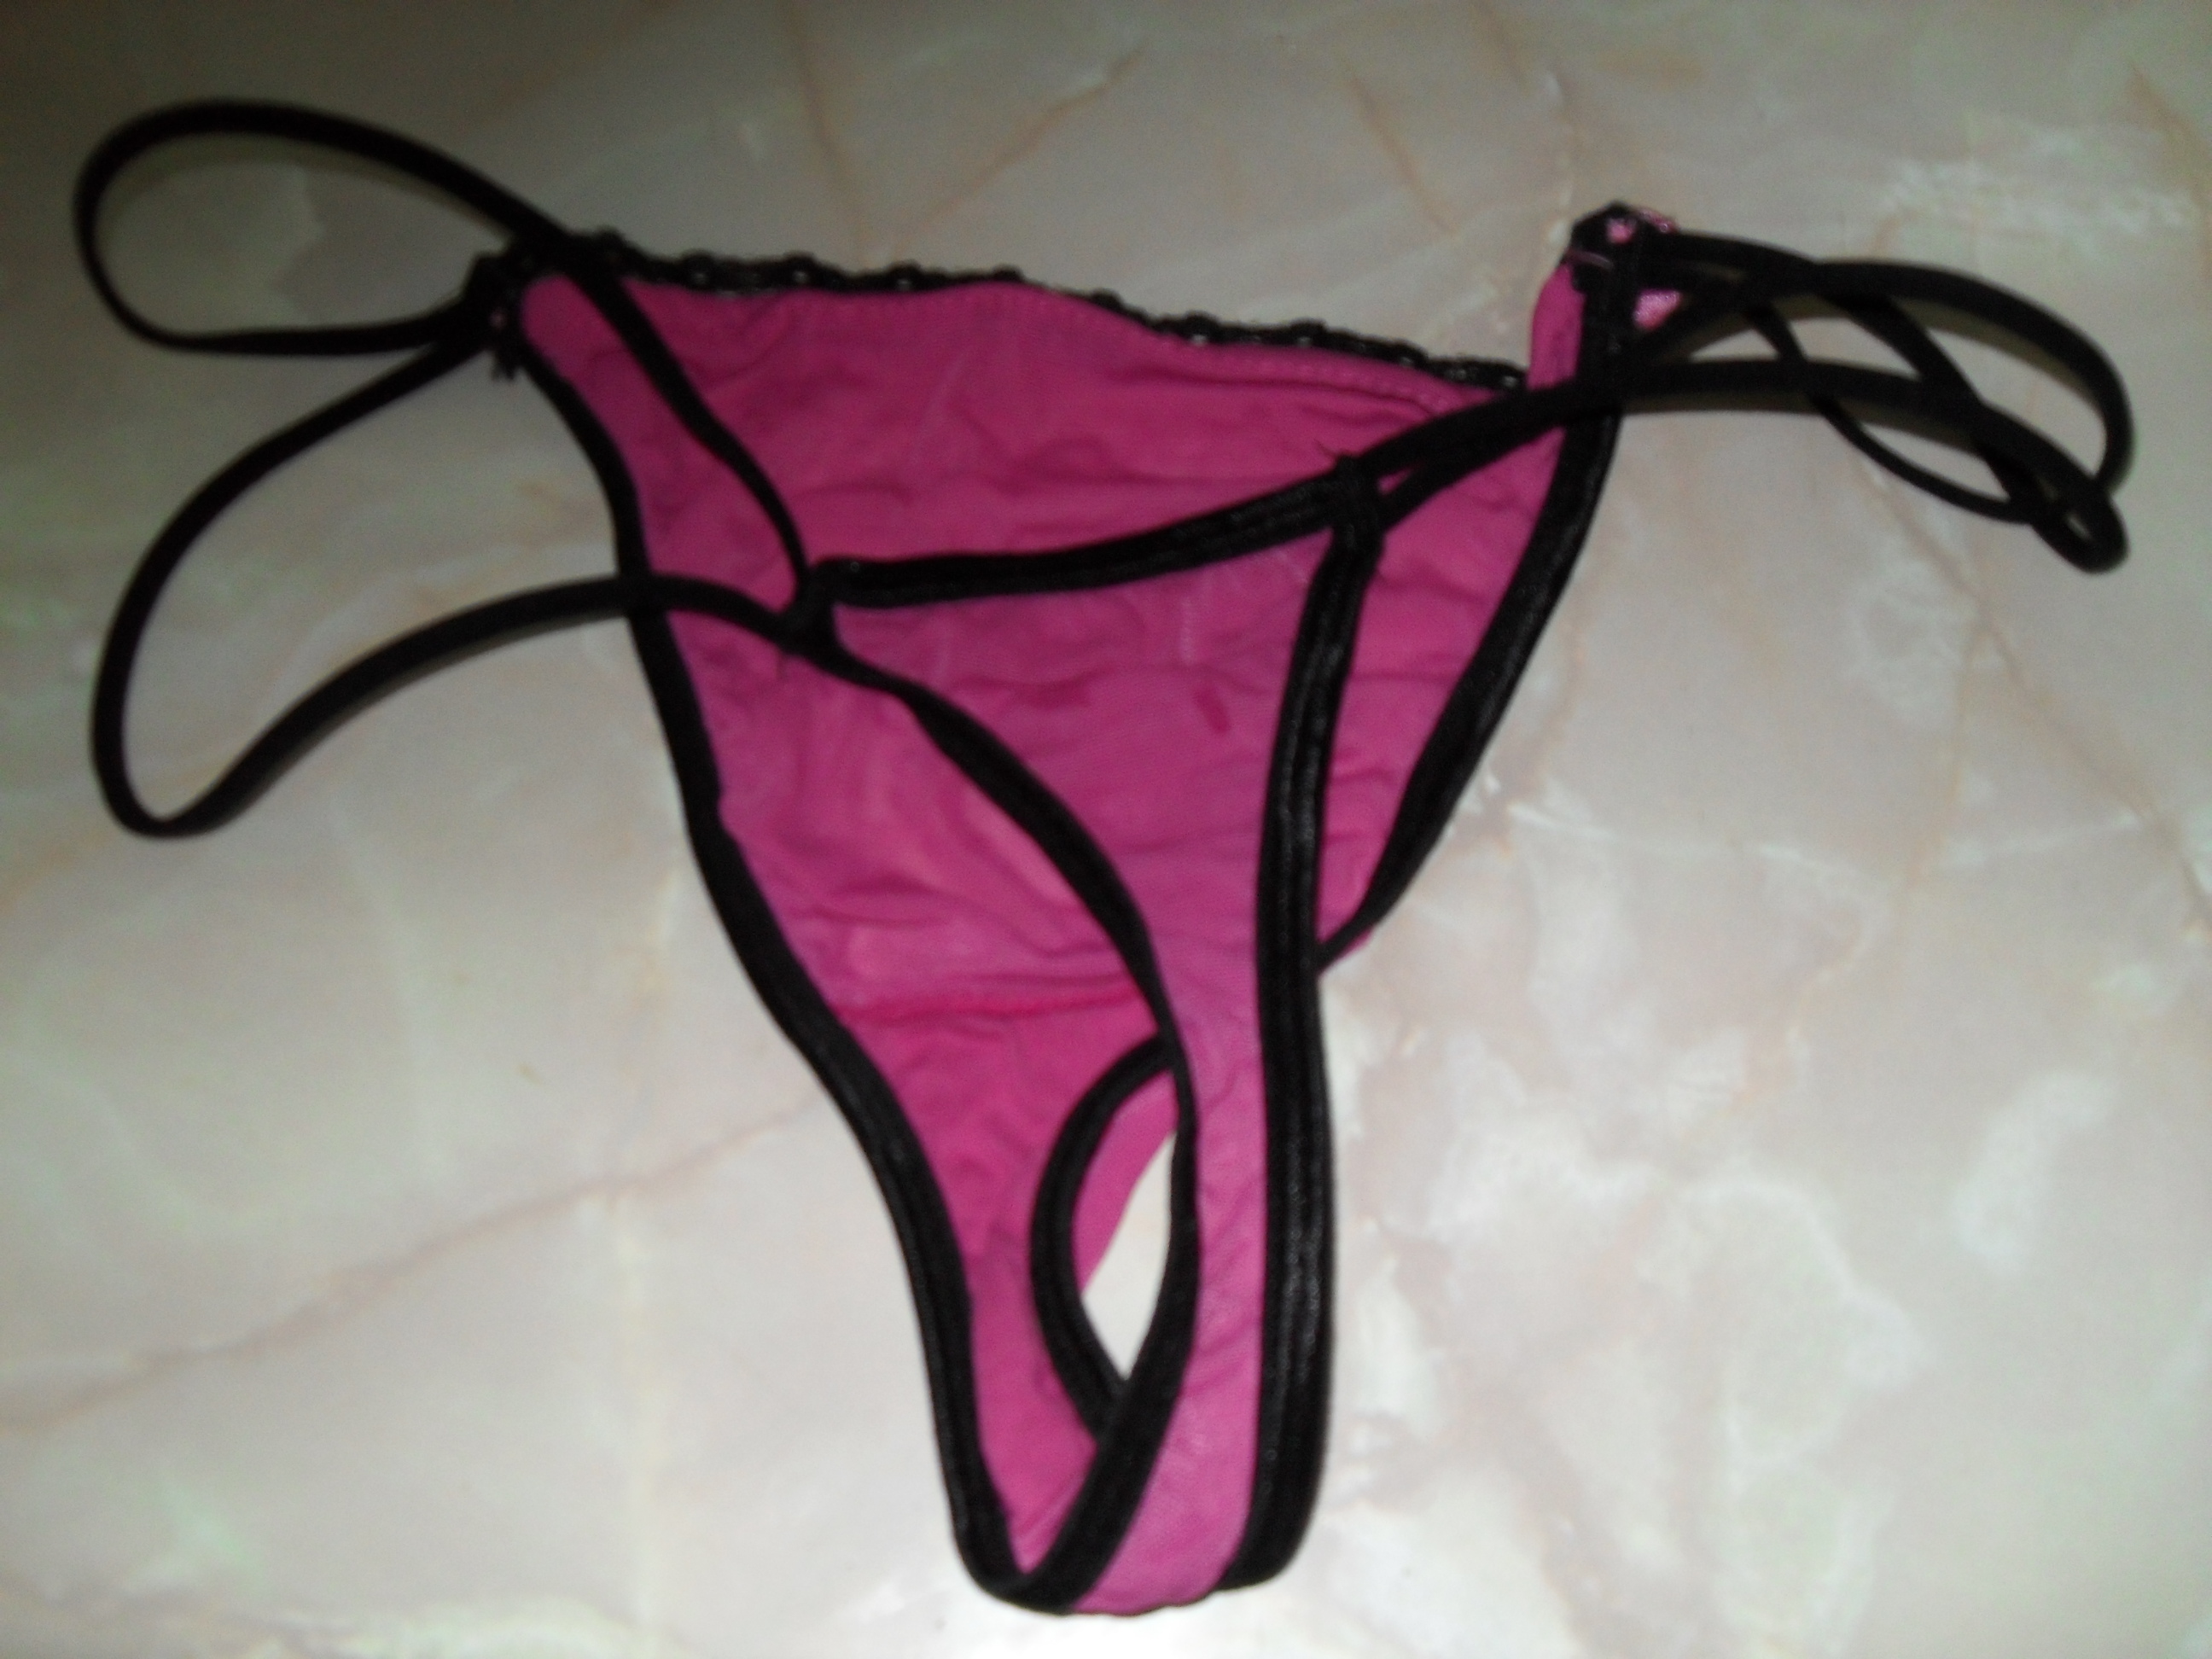 Ref: Dark Pink and Black Dirty Thong (Nylon with Cotton gusset) .